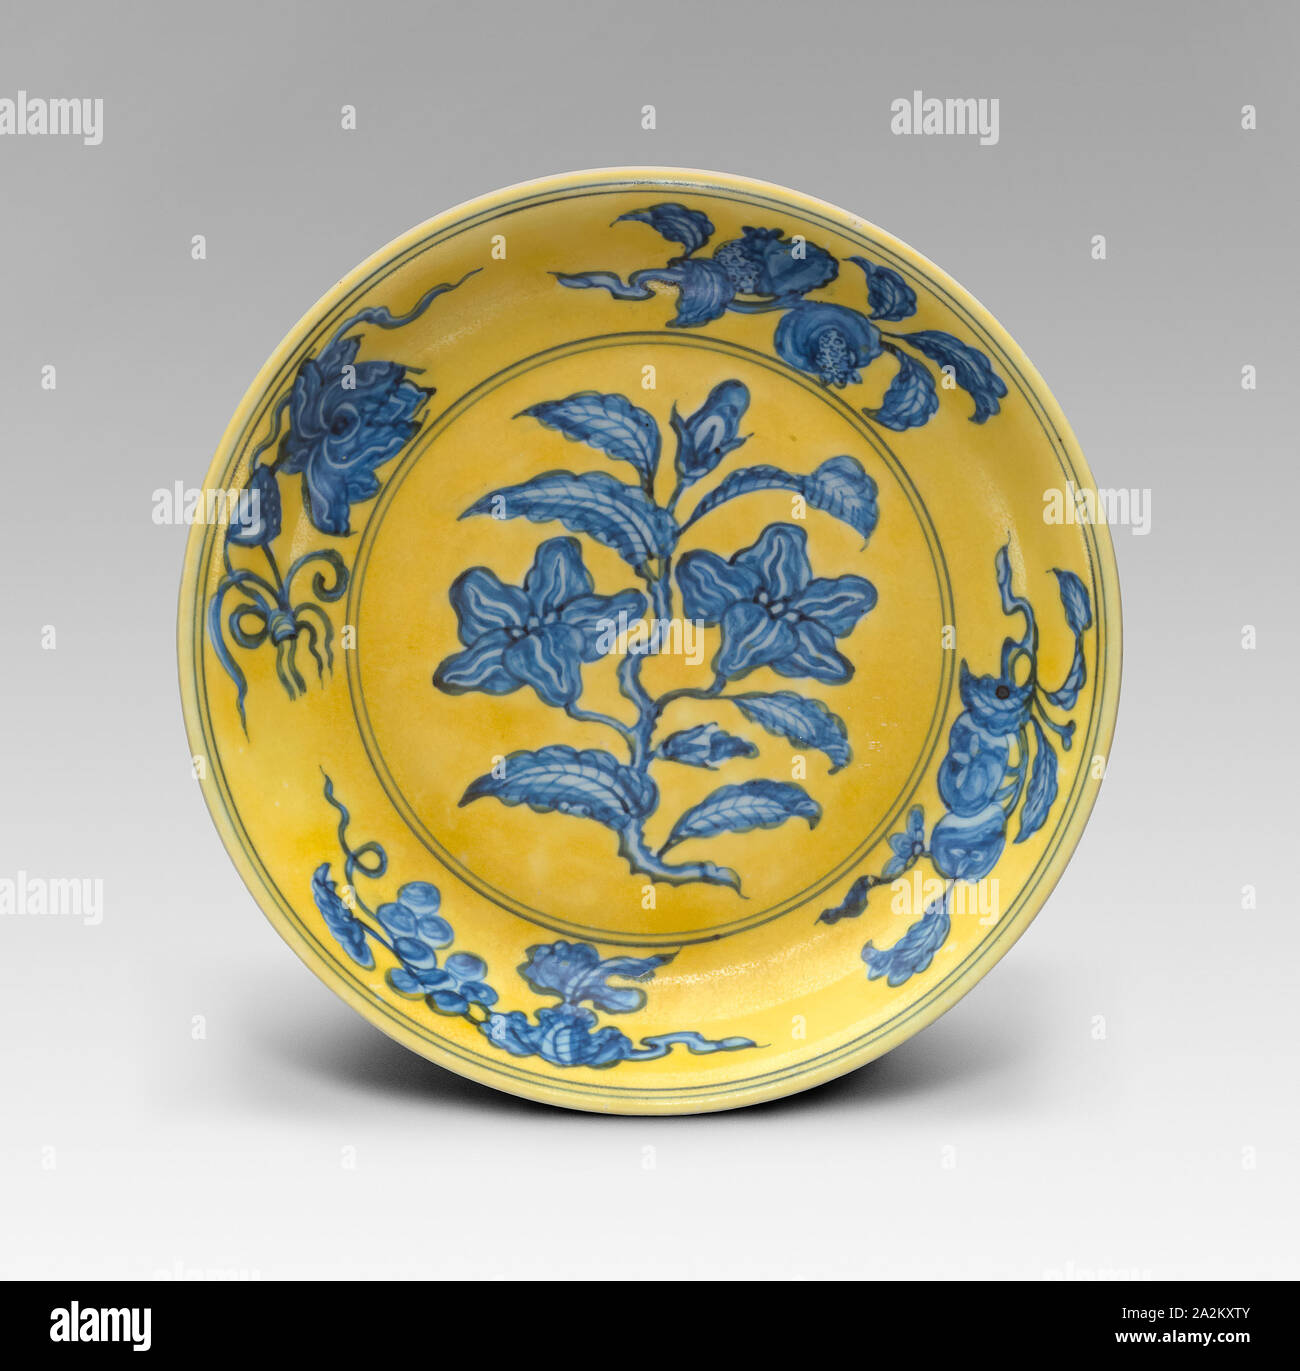 Dish with Floral and Fruit Sprays (Gardenia Dish), Ming dynasty, Hongzhi reign mark and period (1488–1505), China, Porcelain painted in underglaze blue and overglaze yellow enamel, Diam: 25.6 cm (10 1/8 in.), Untitled, 1855/68, Georgina Cowper, attributed, English, mid 19th century, England, Albumen print, 33.7 × 19.6 cm (image), 24.1 × 20 cm (paper, oval), 29.1 × 23.4 cm (album page Stock Photo